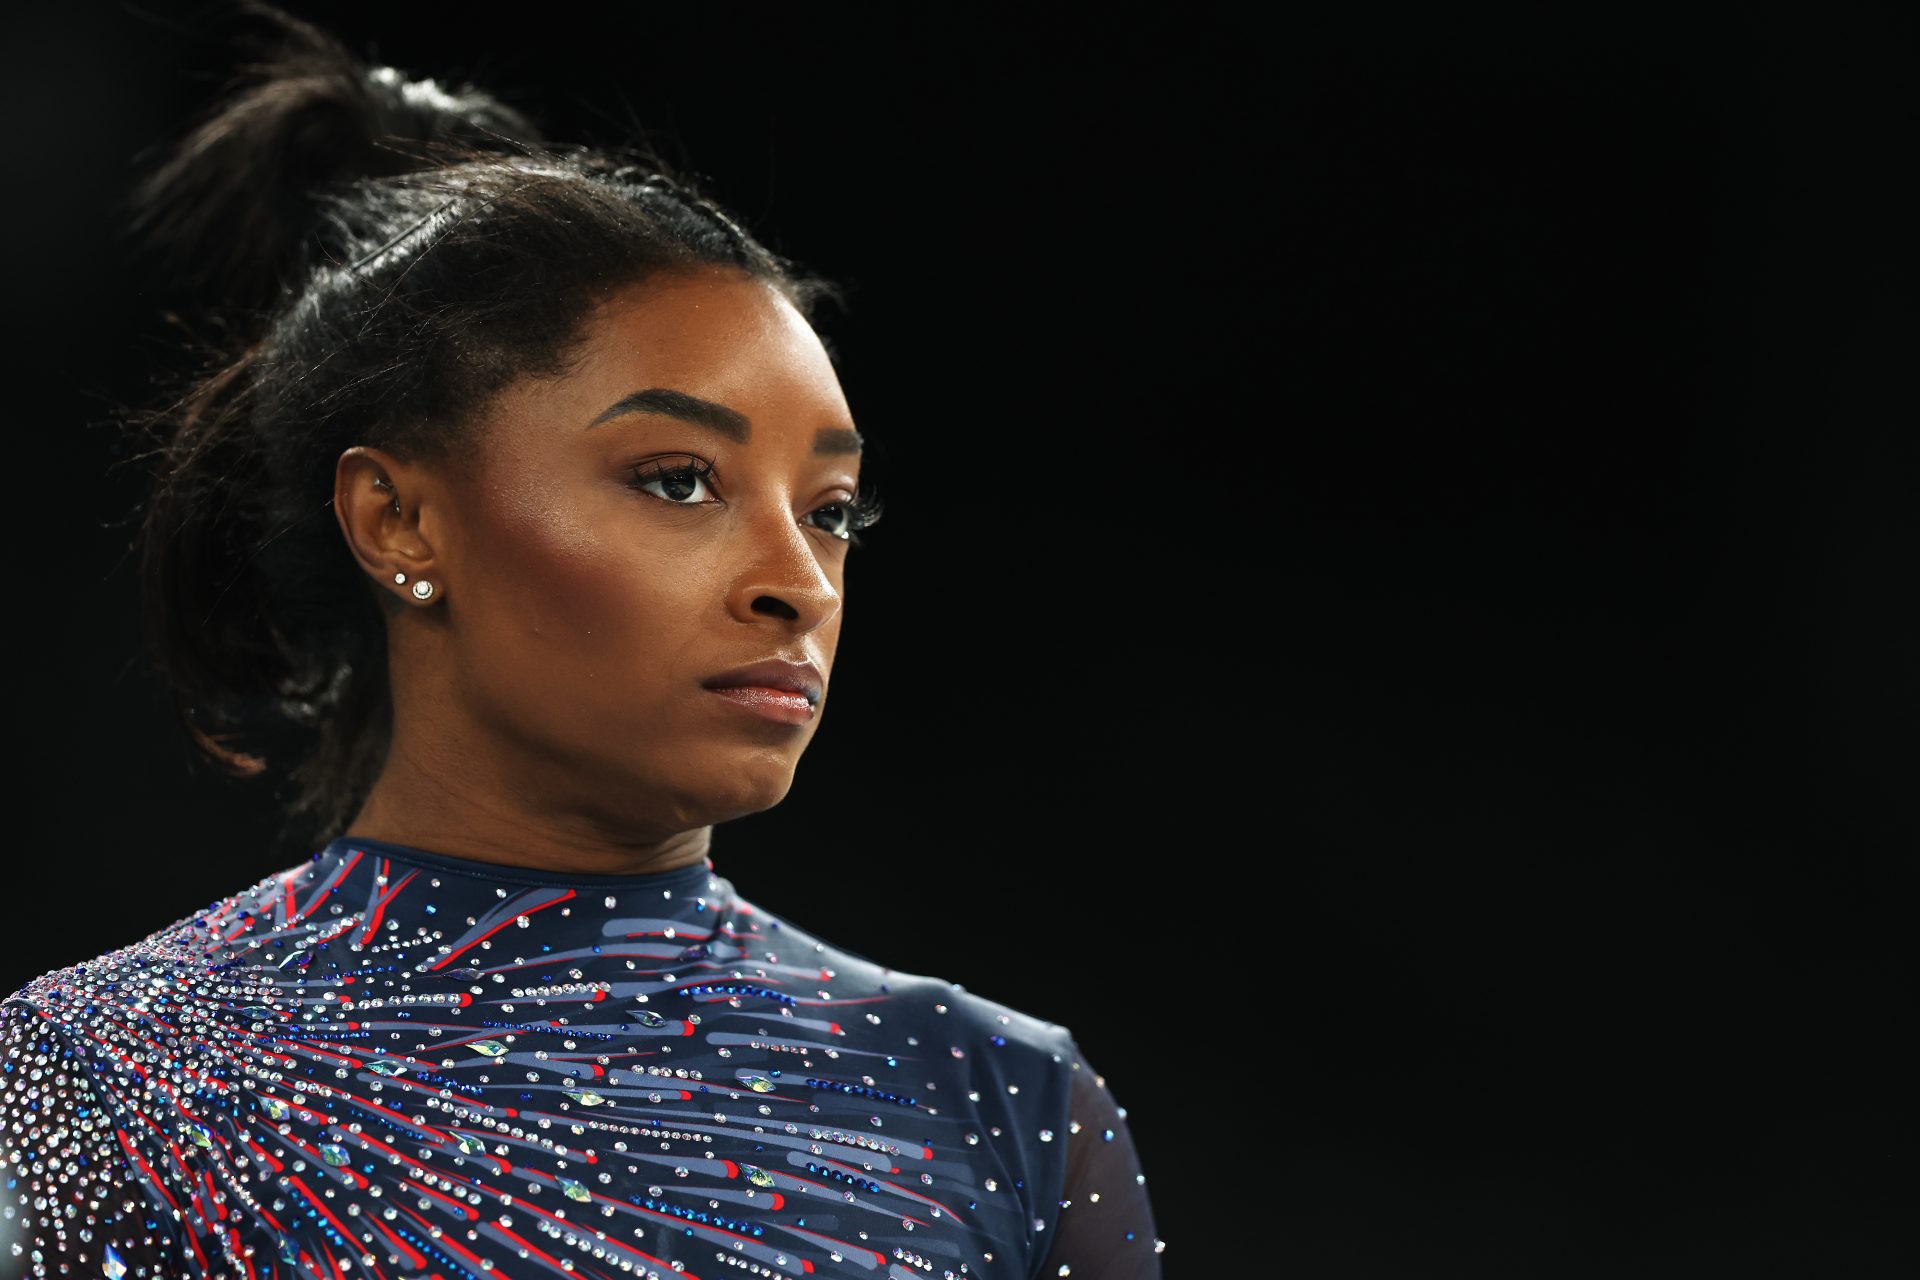 Simone Biles: The greatest athlete of all time?